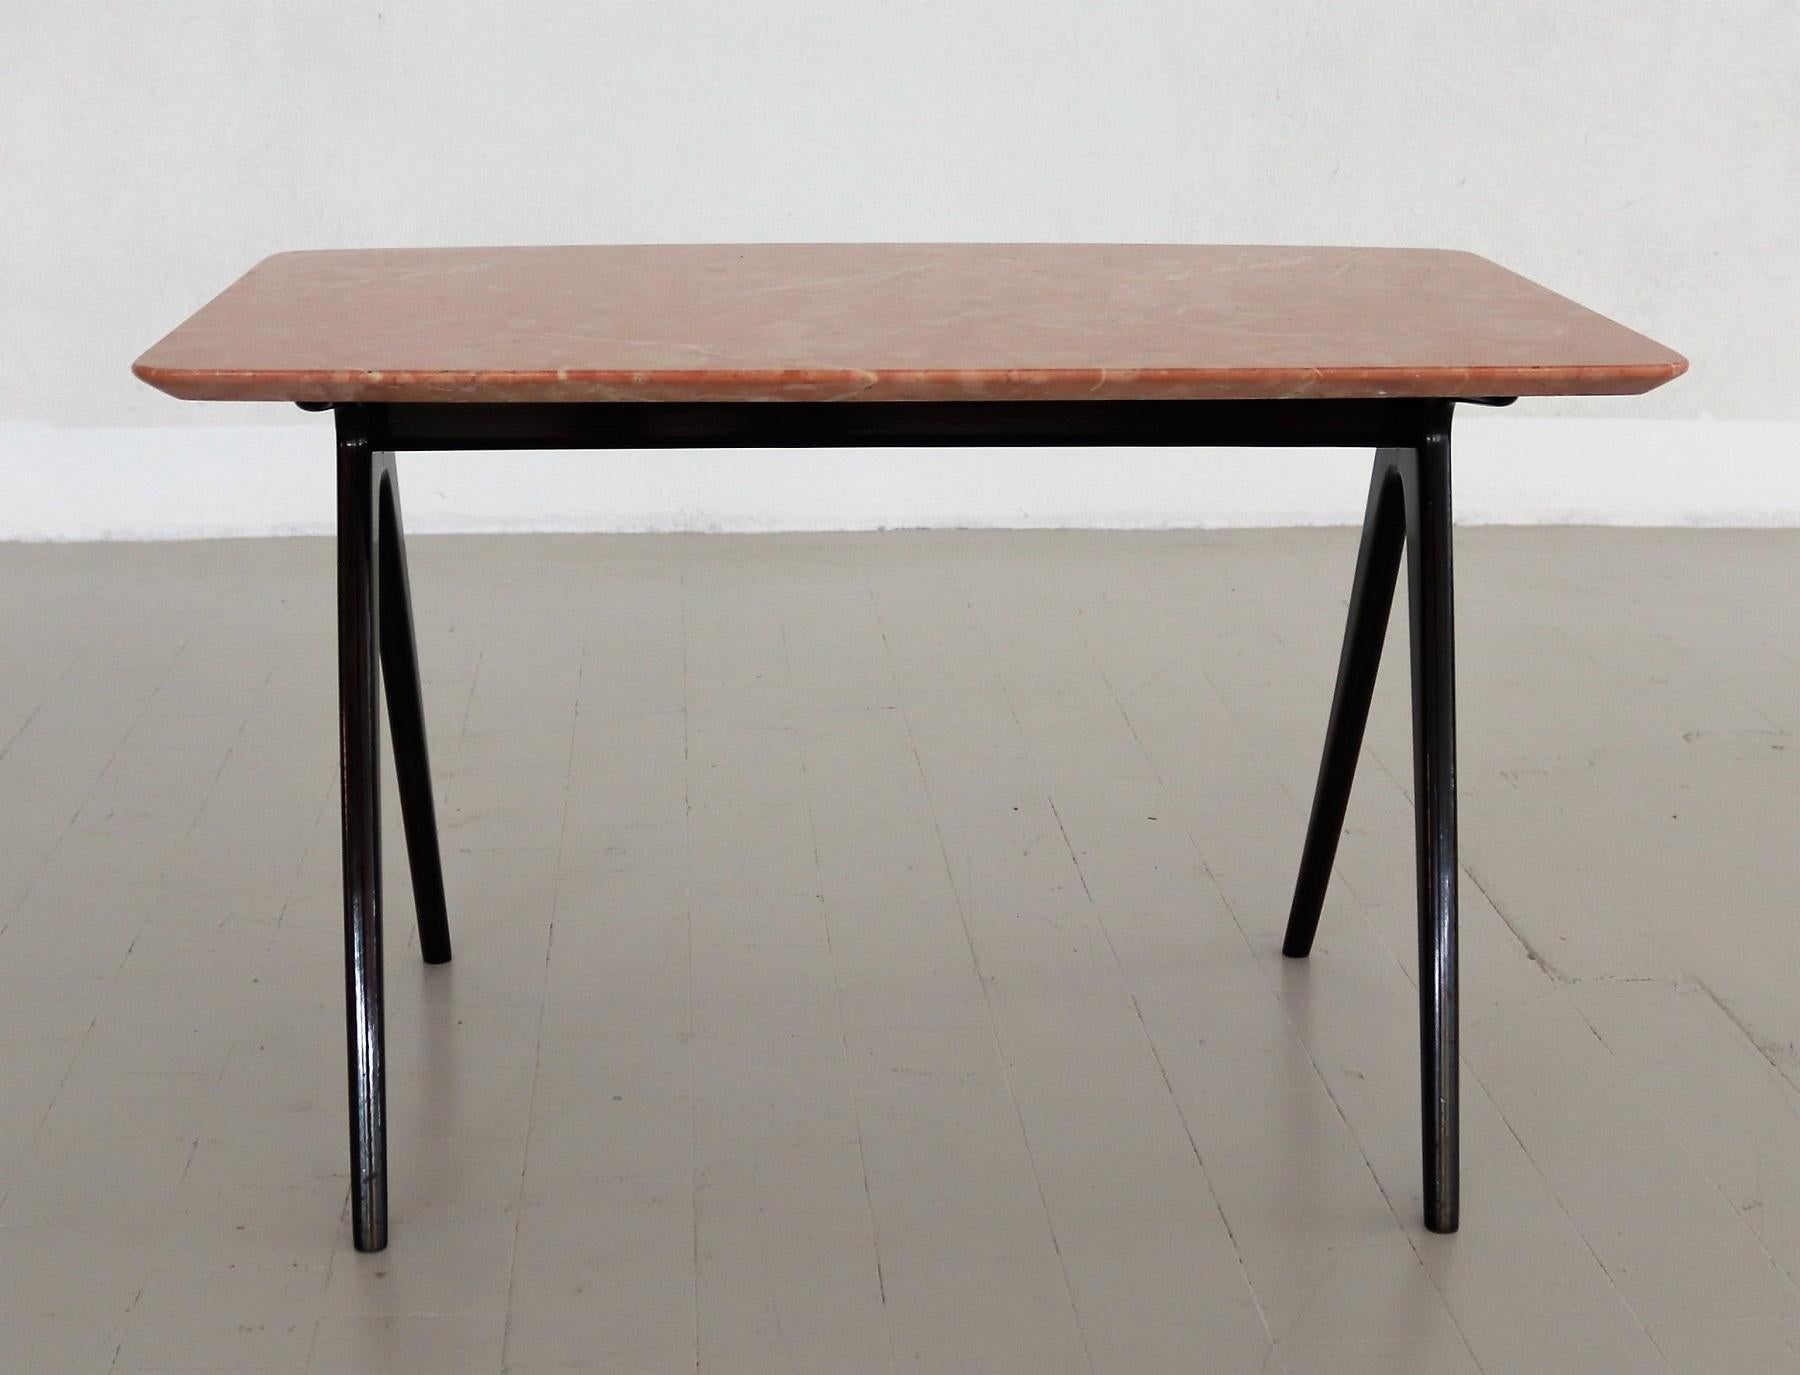 Mid-20th Century Italian Midcentury Coffee Table with Pink Marble Top and Wooden Legs, 1950s